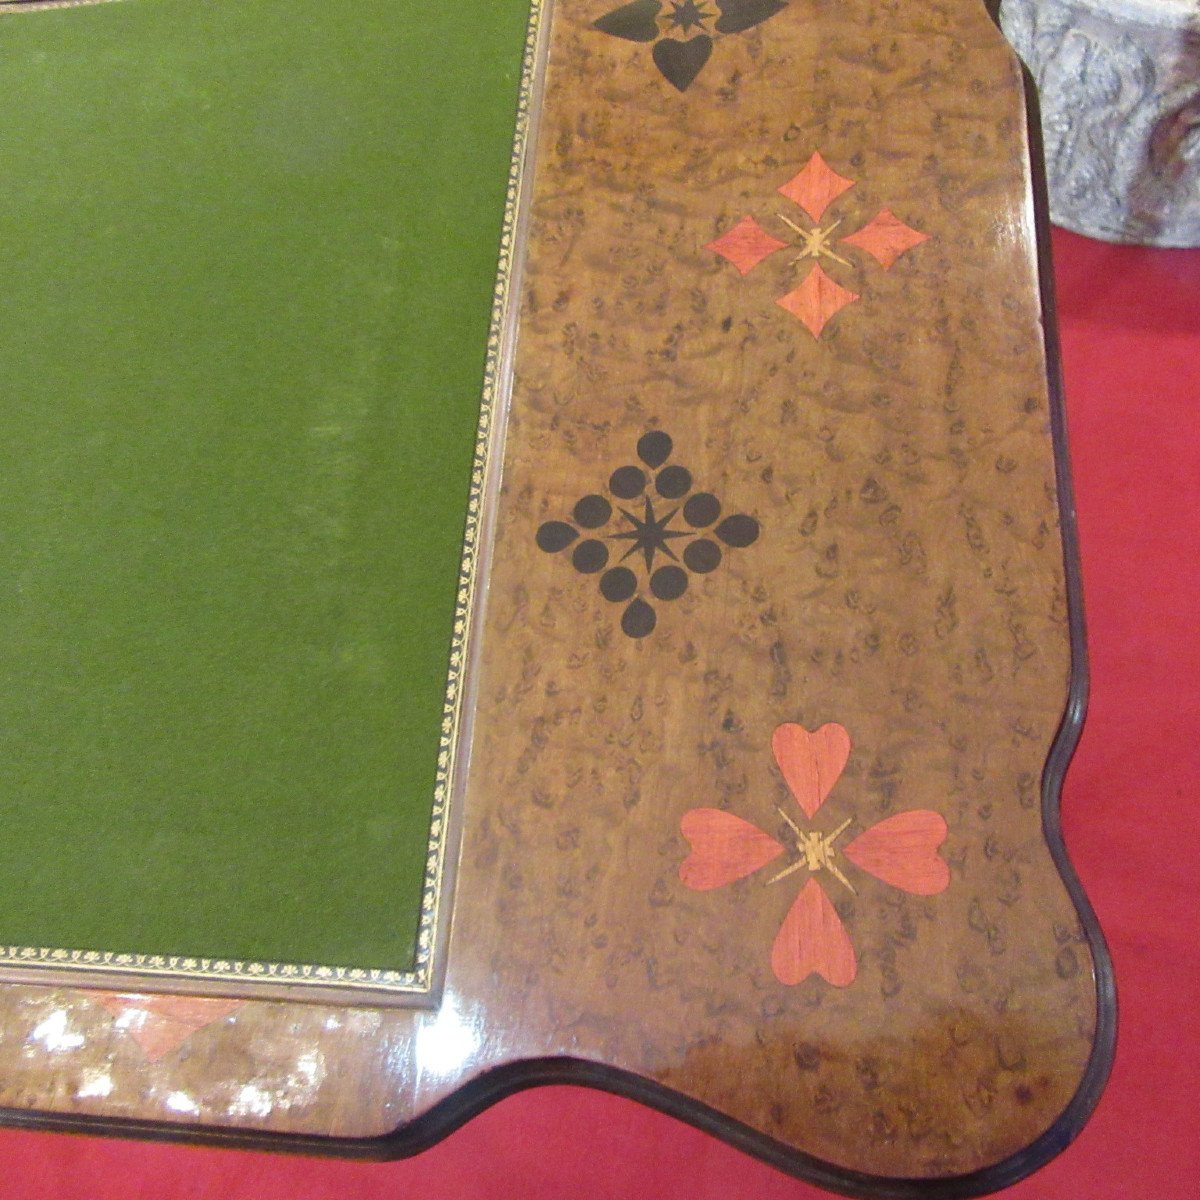 Games Table Signed Gallé In Rosewood In Excellent Condition. Art Nouveau Period-photo-3